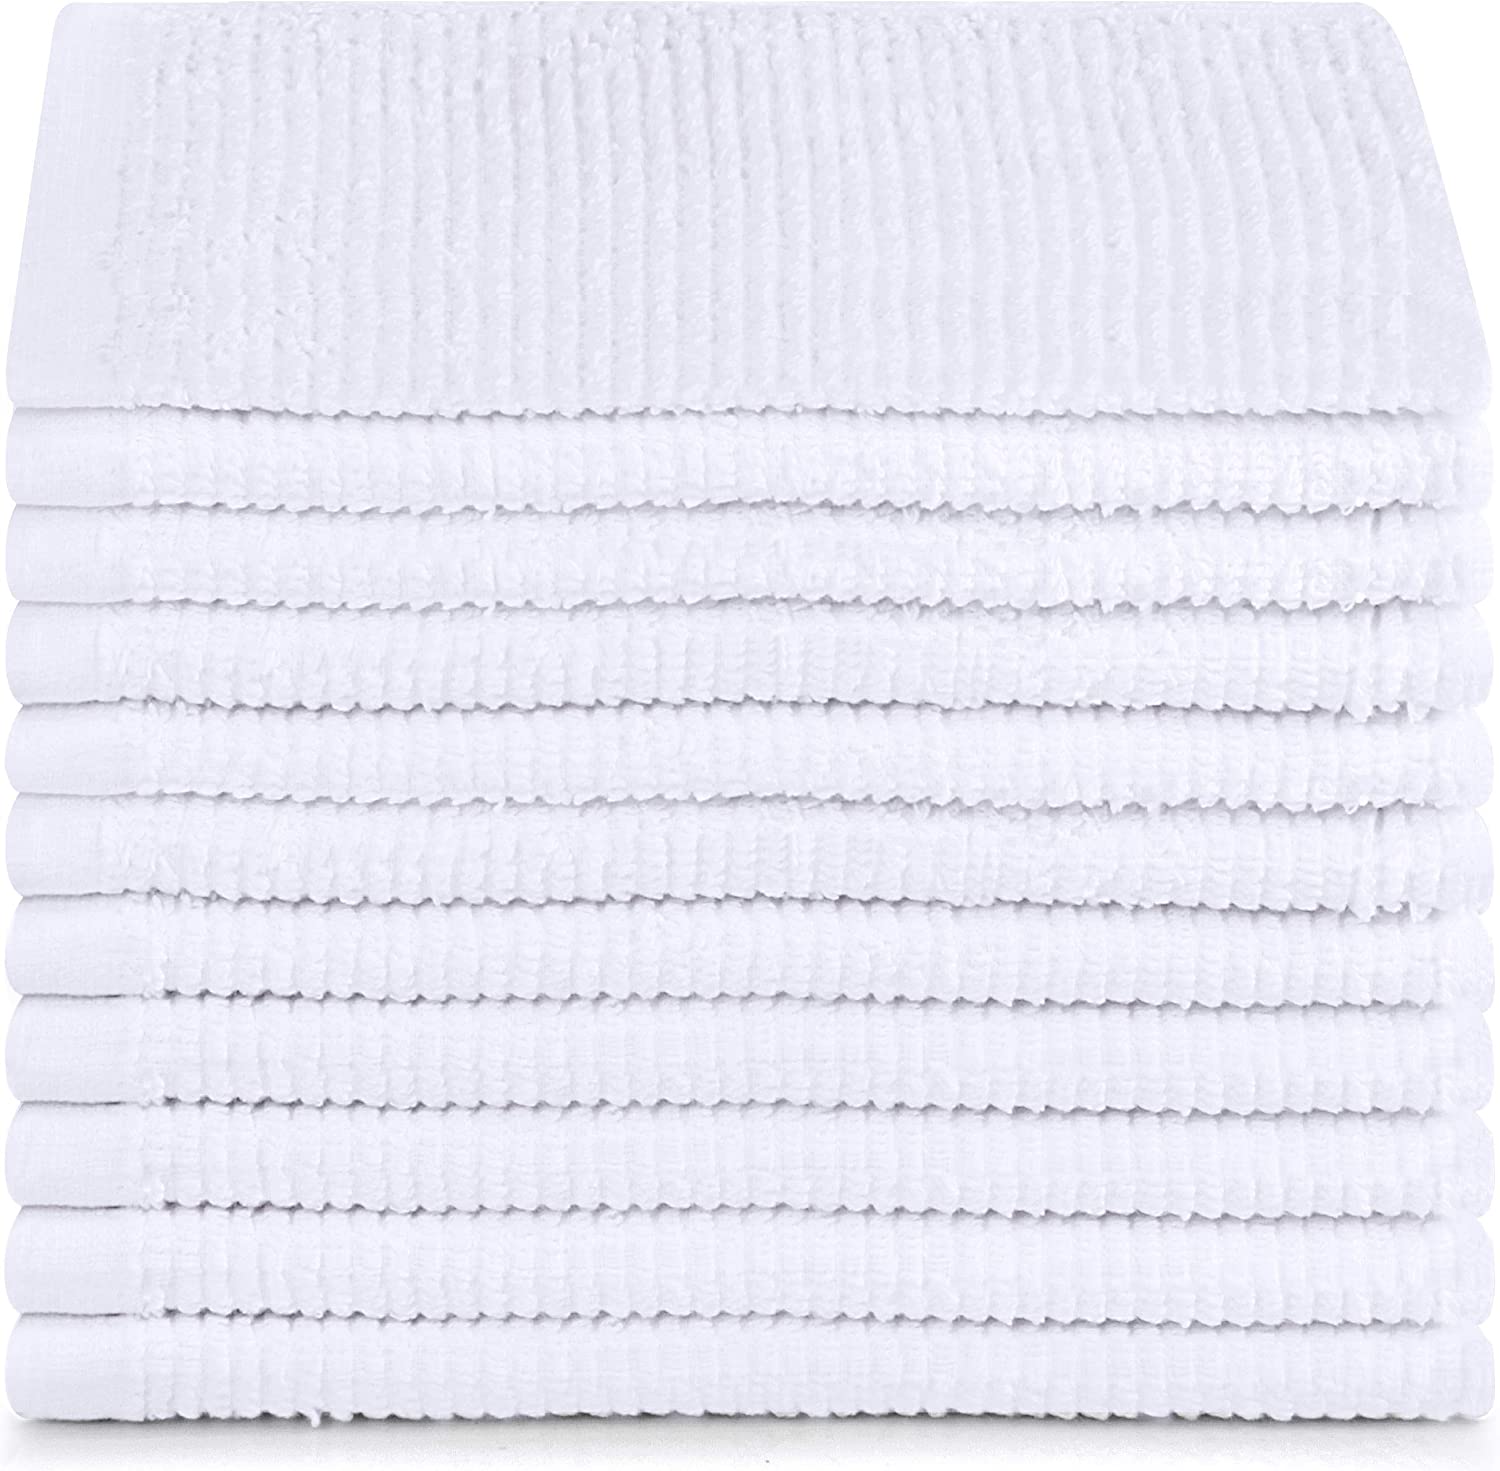 Utopia Towels Kitchen Bar Mops Towels, Pack of 12 Towels - 16 x 19 Inches,  100% Cotton Super Absorbent Dusty Pink Bar Towels, Multi-Purpose Cleaning